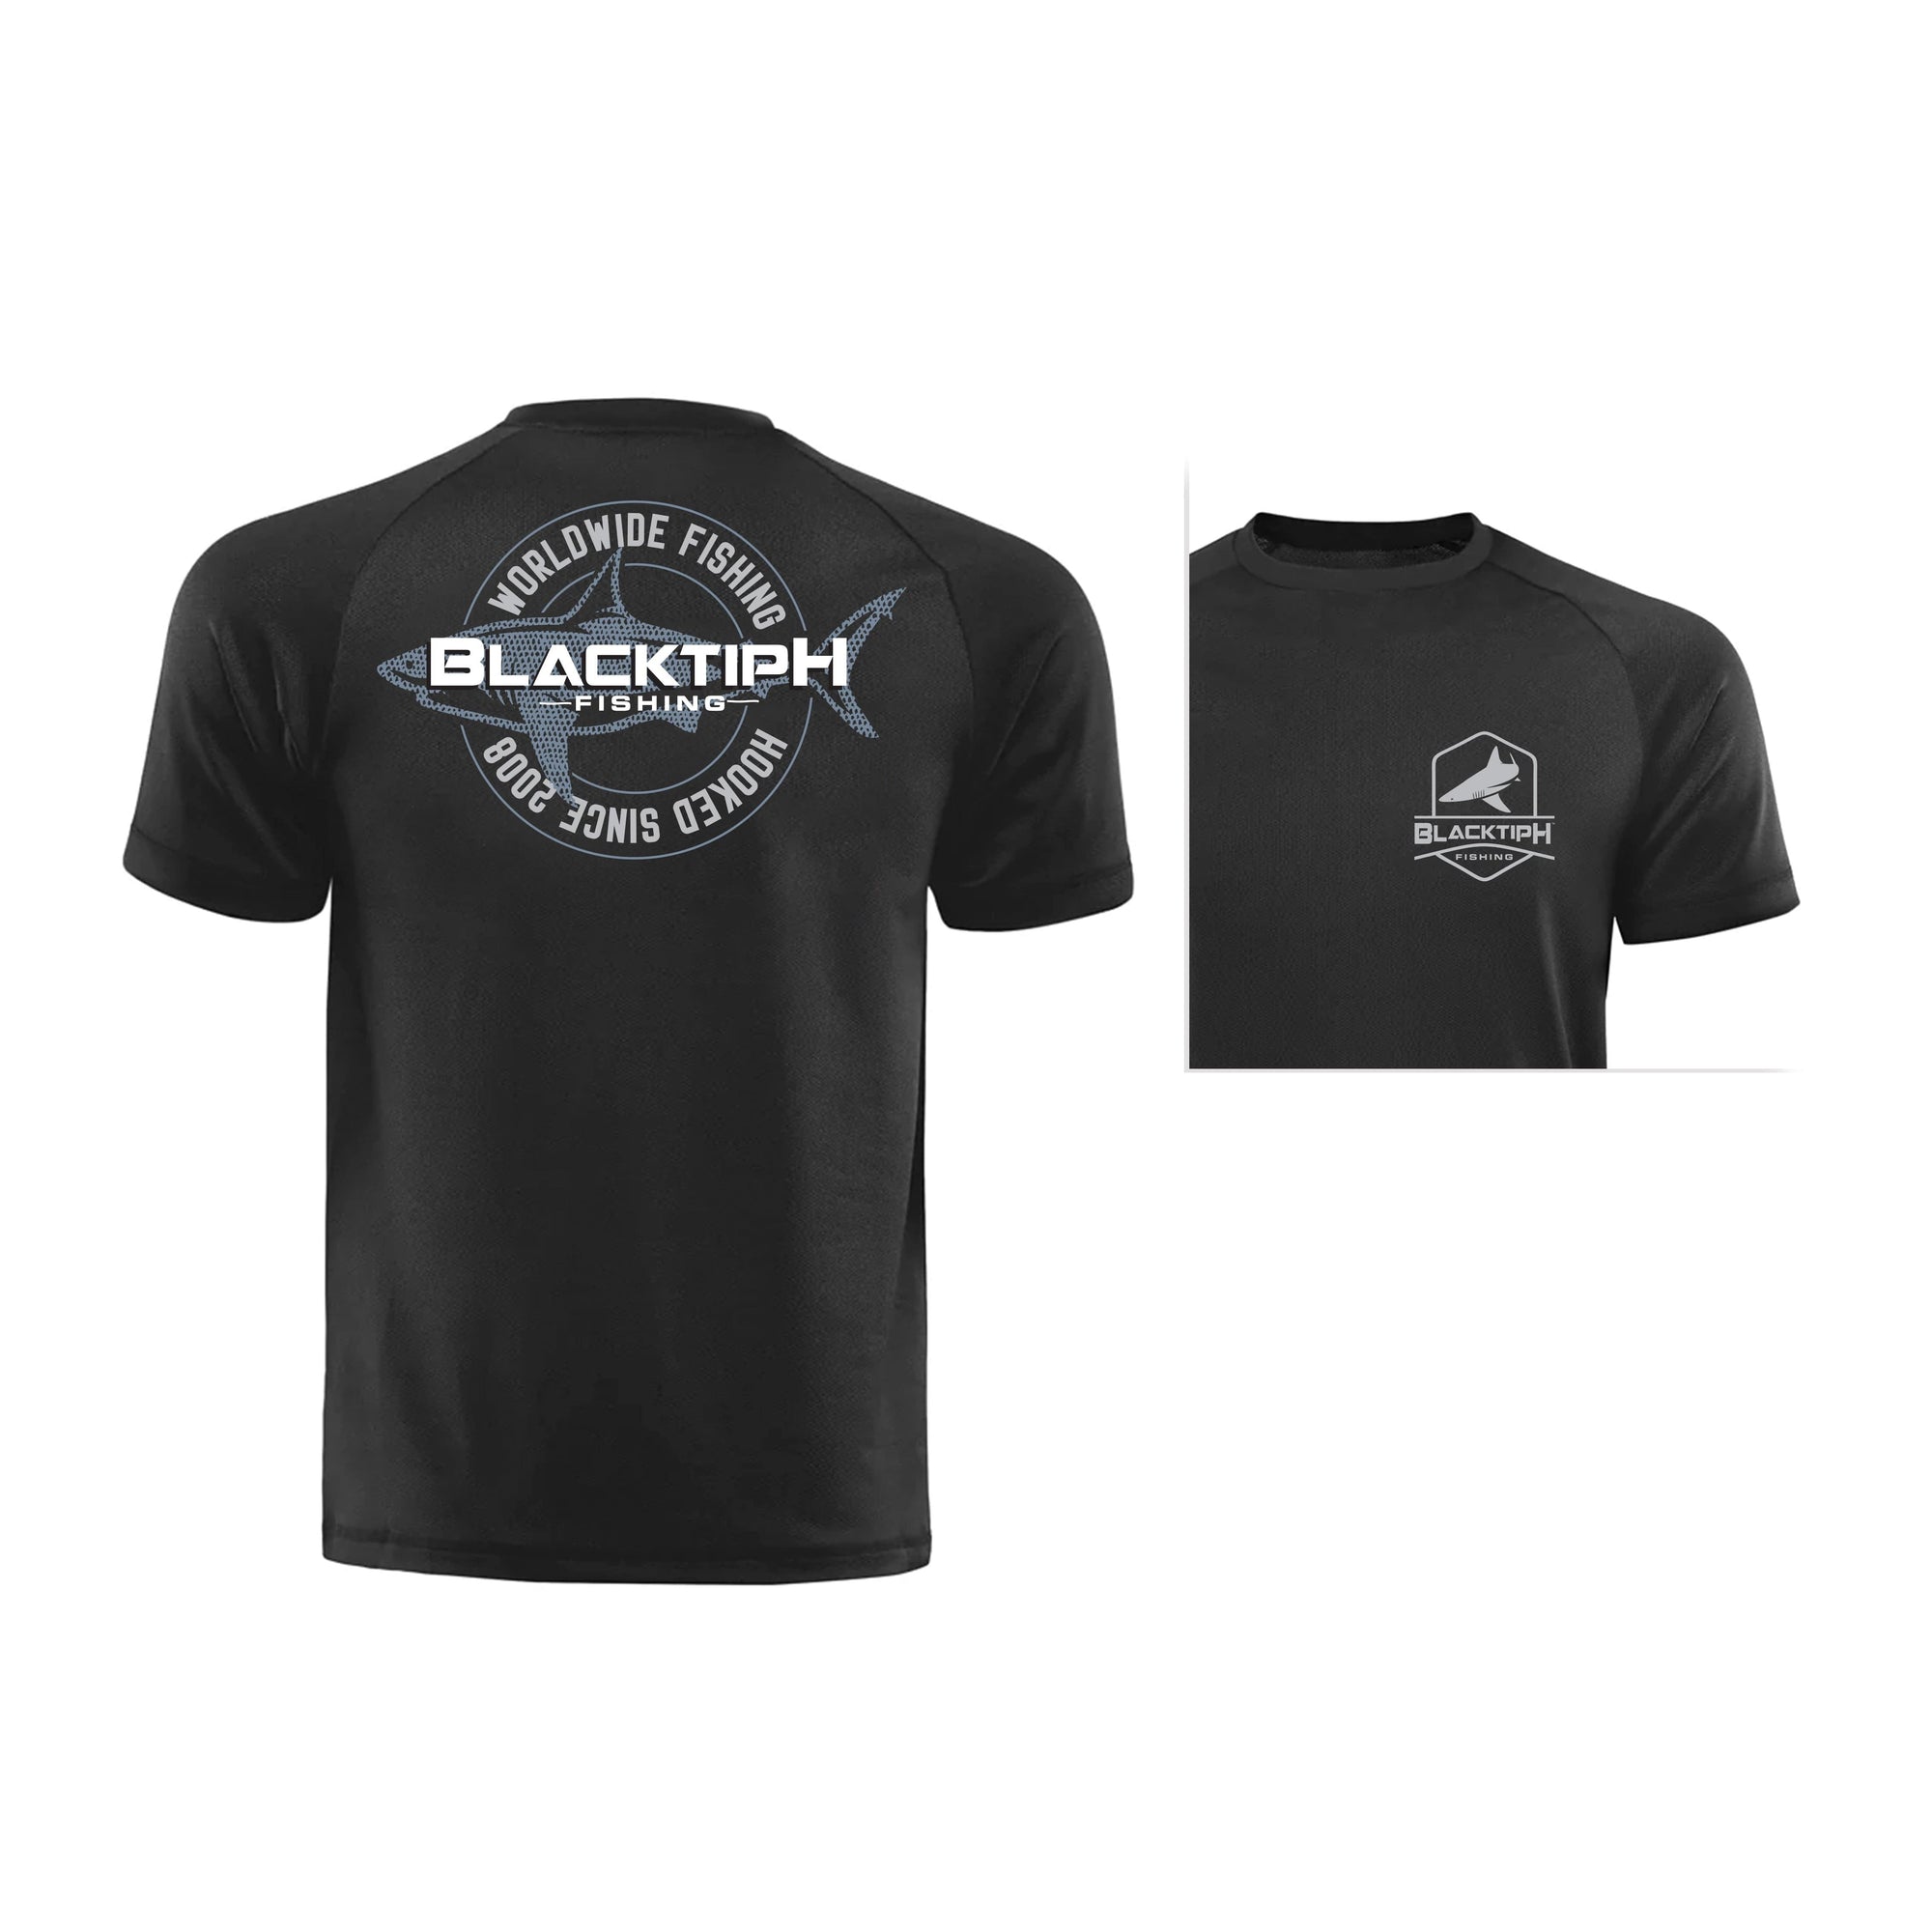 BlacktipH Shirts Youth Small / Black BlacktipH "Hooked Since 2008" Lifestyle T-Shirt